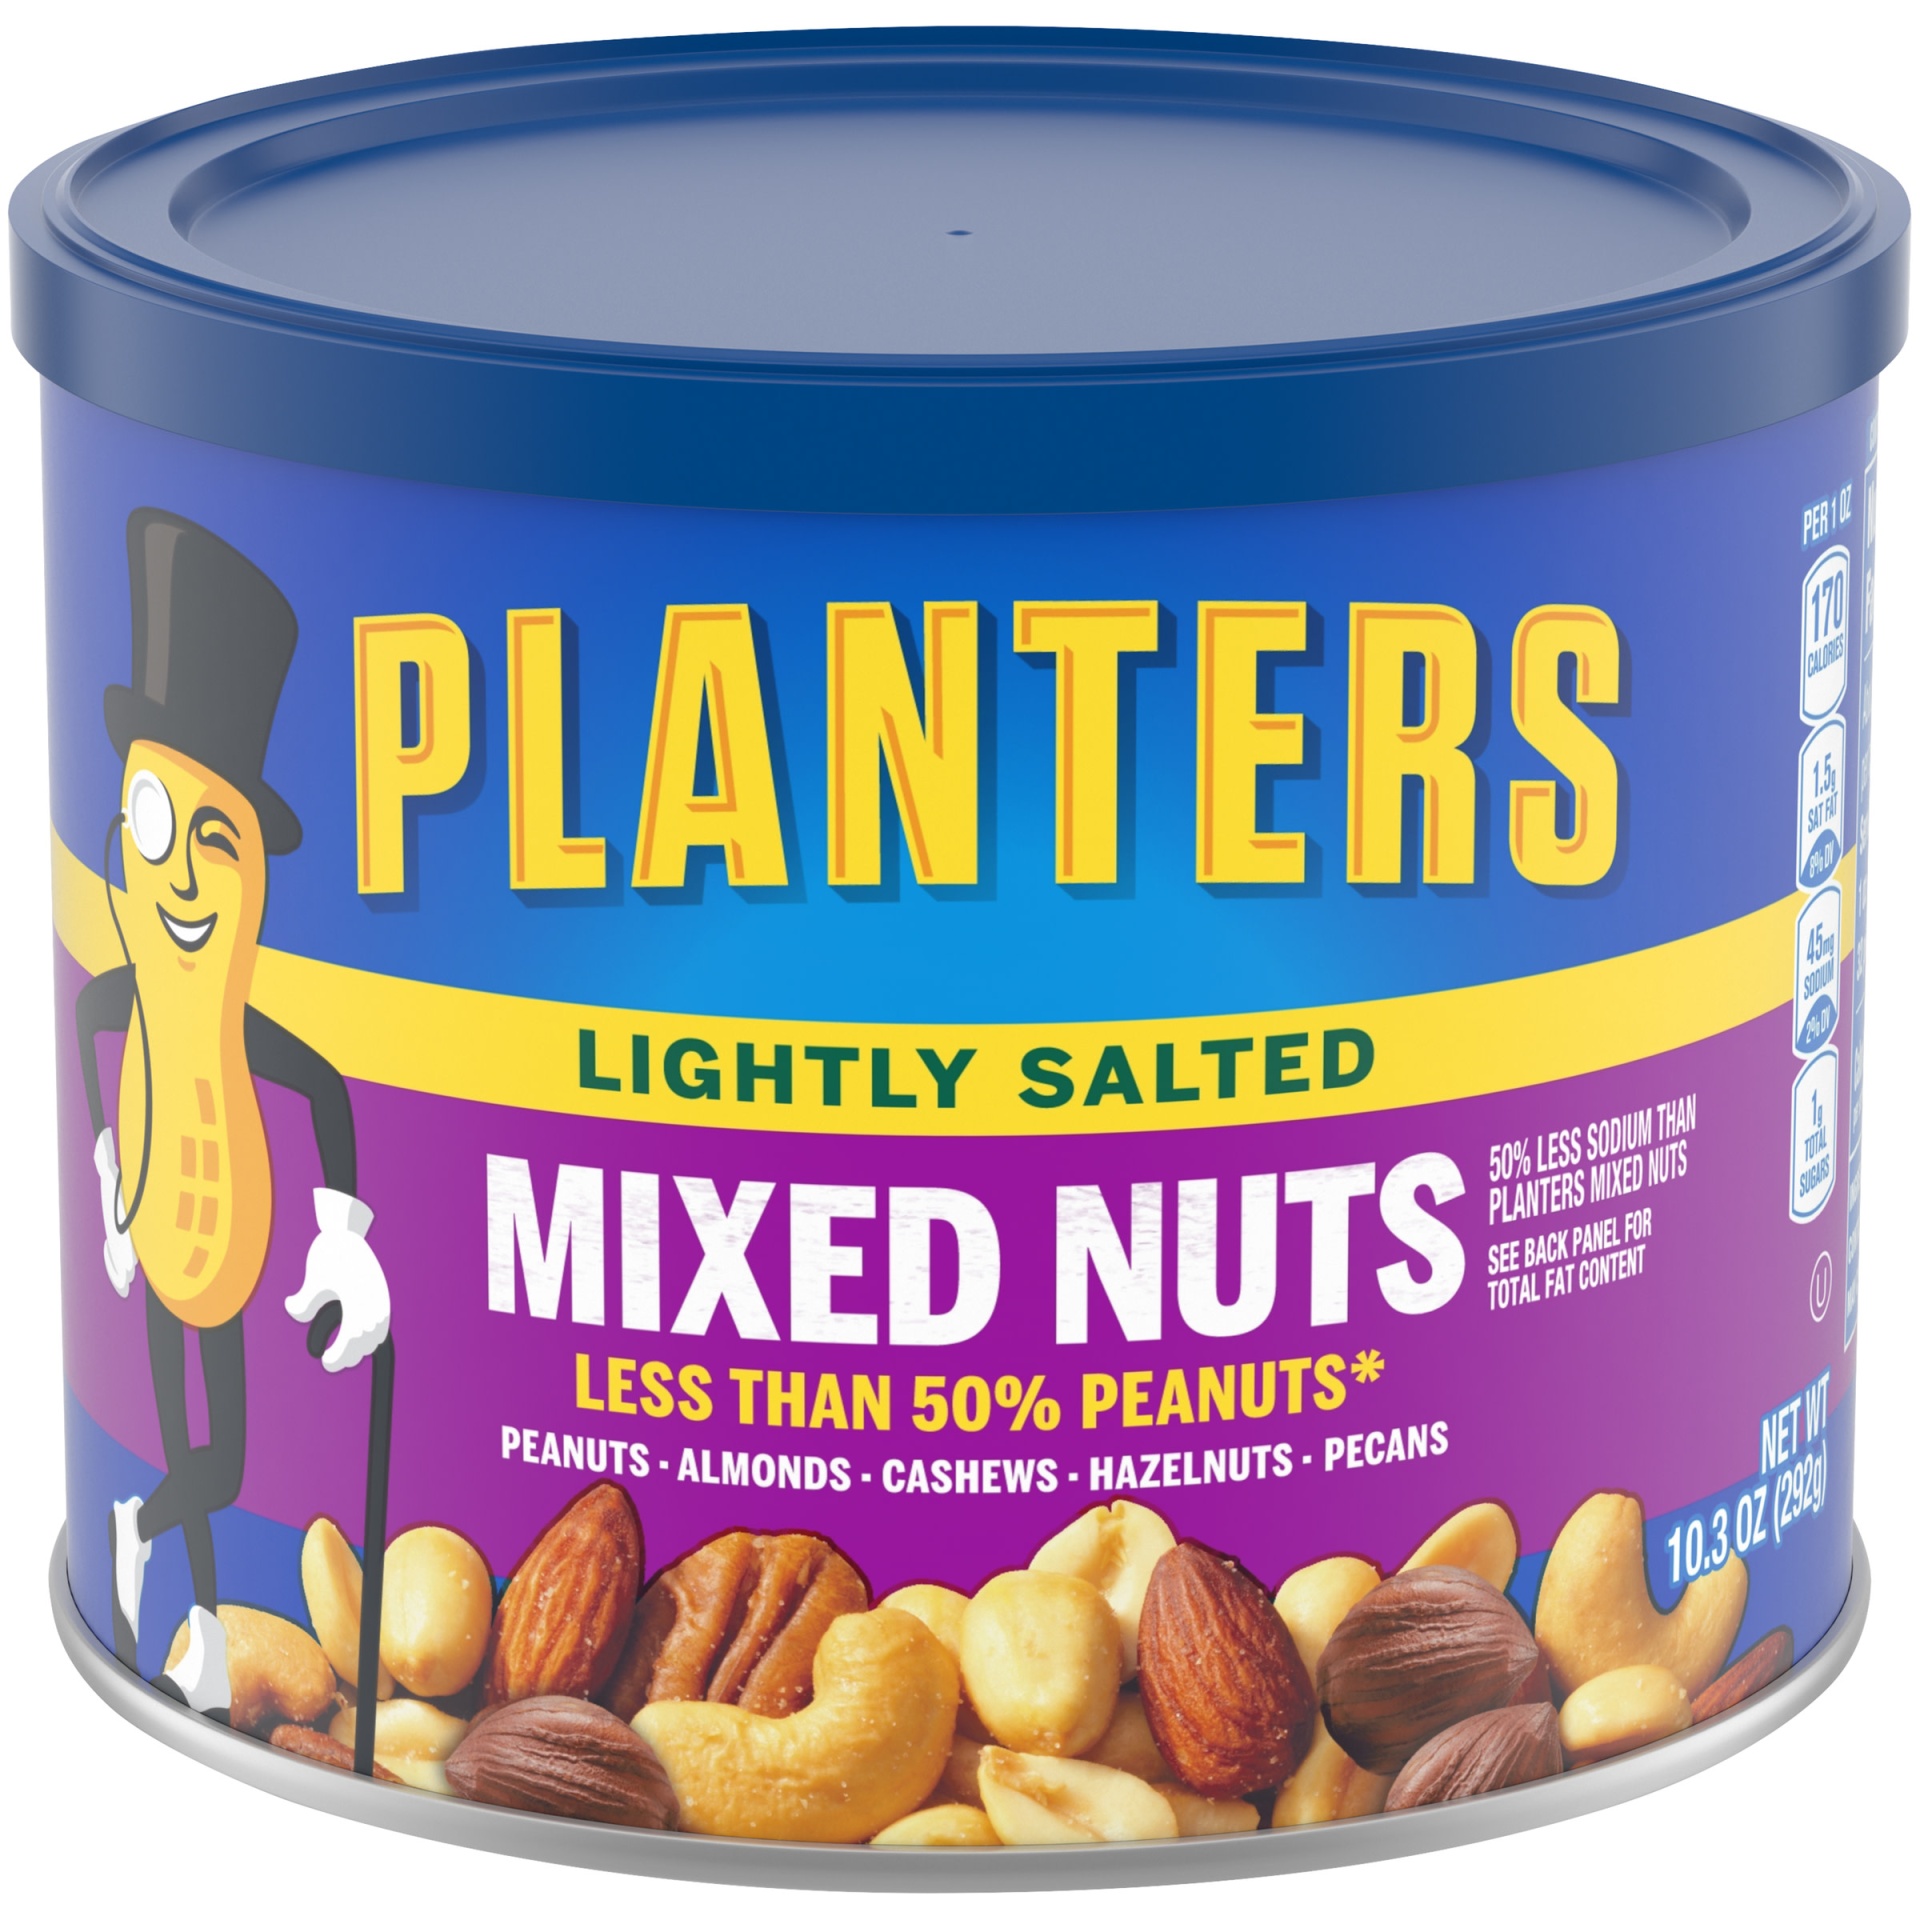 slide 1 of 7, Planters Lightly Salted Mixed Nuts 10.3 oz, 10.3 oz